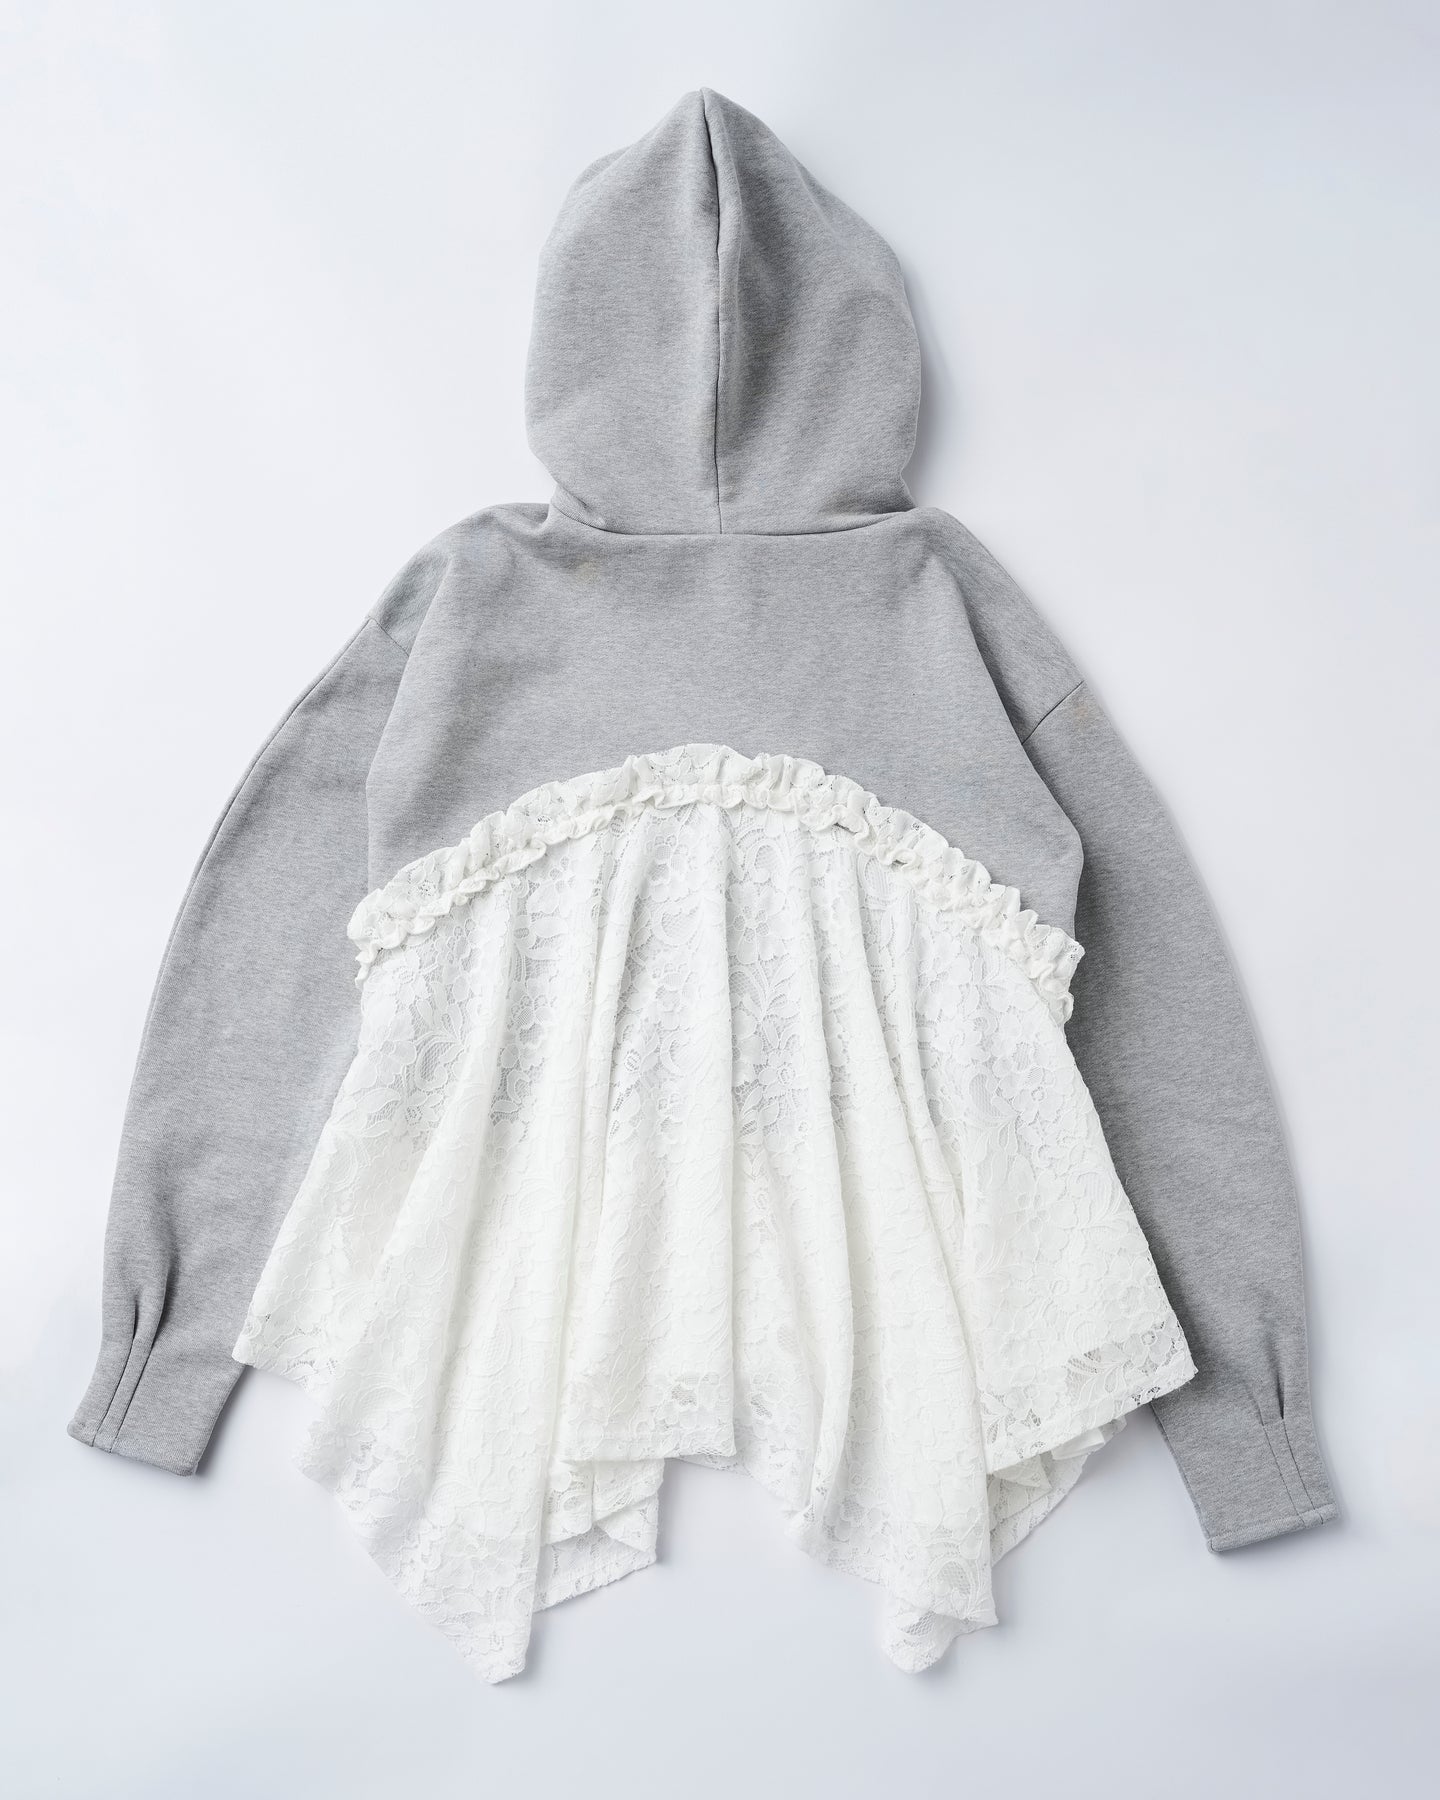 Lace docking hoodie (Gray)